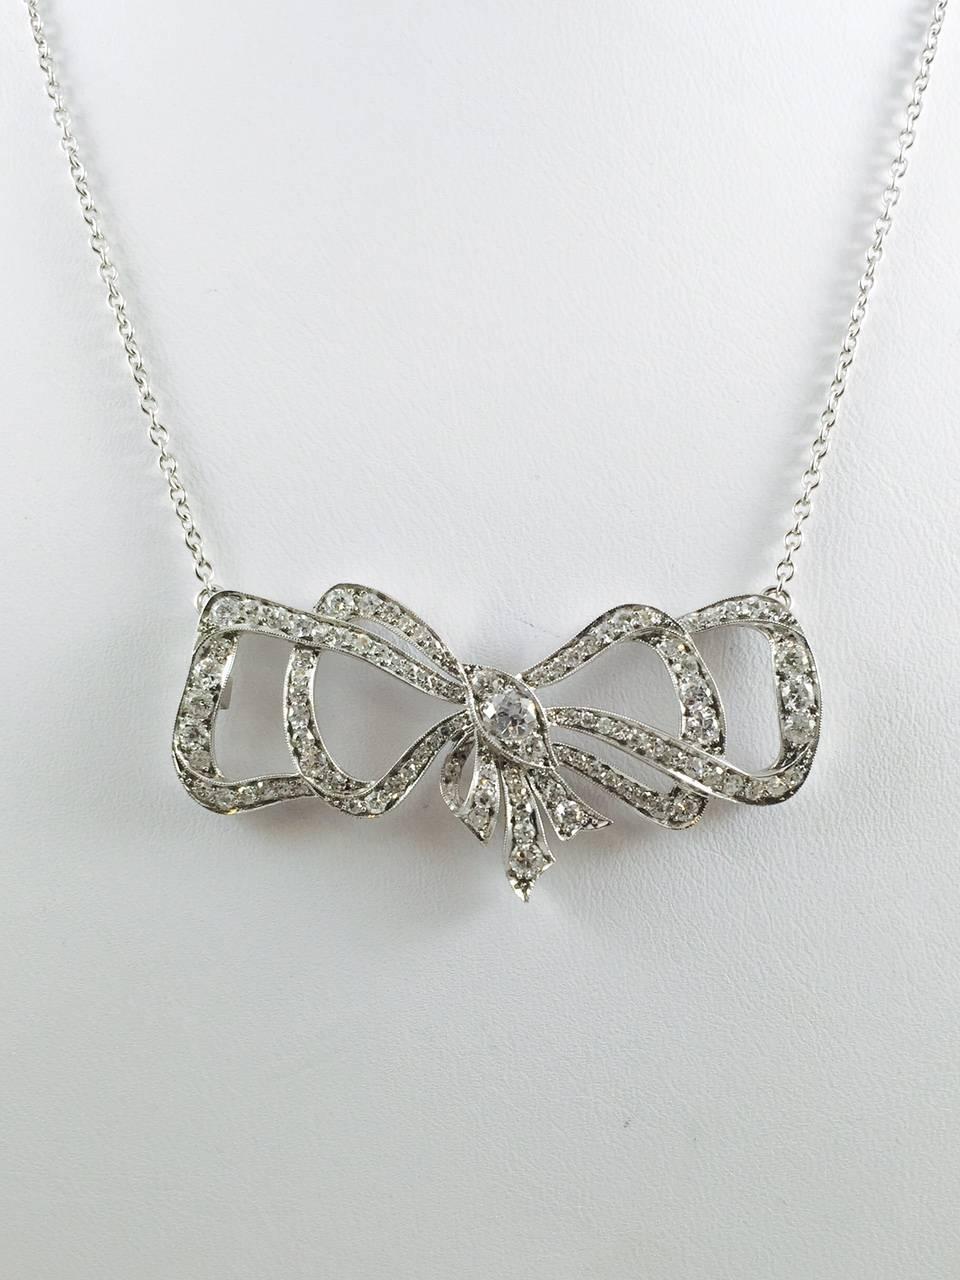 Masterfully created in Platinum.  Curves, twists and turns form the prominent bow centerpiece filled with brilliant cut diamonds. Every edge of the bow is finished with milgrained edges.  Milgrain literally means 